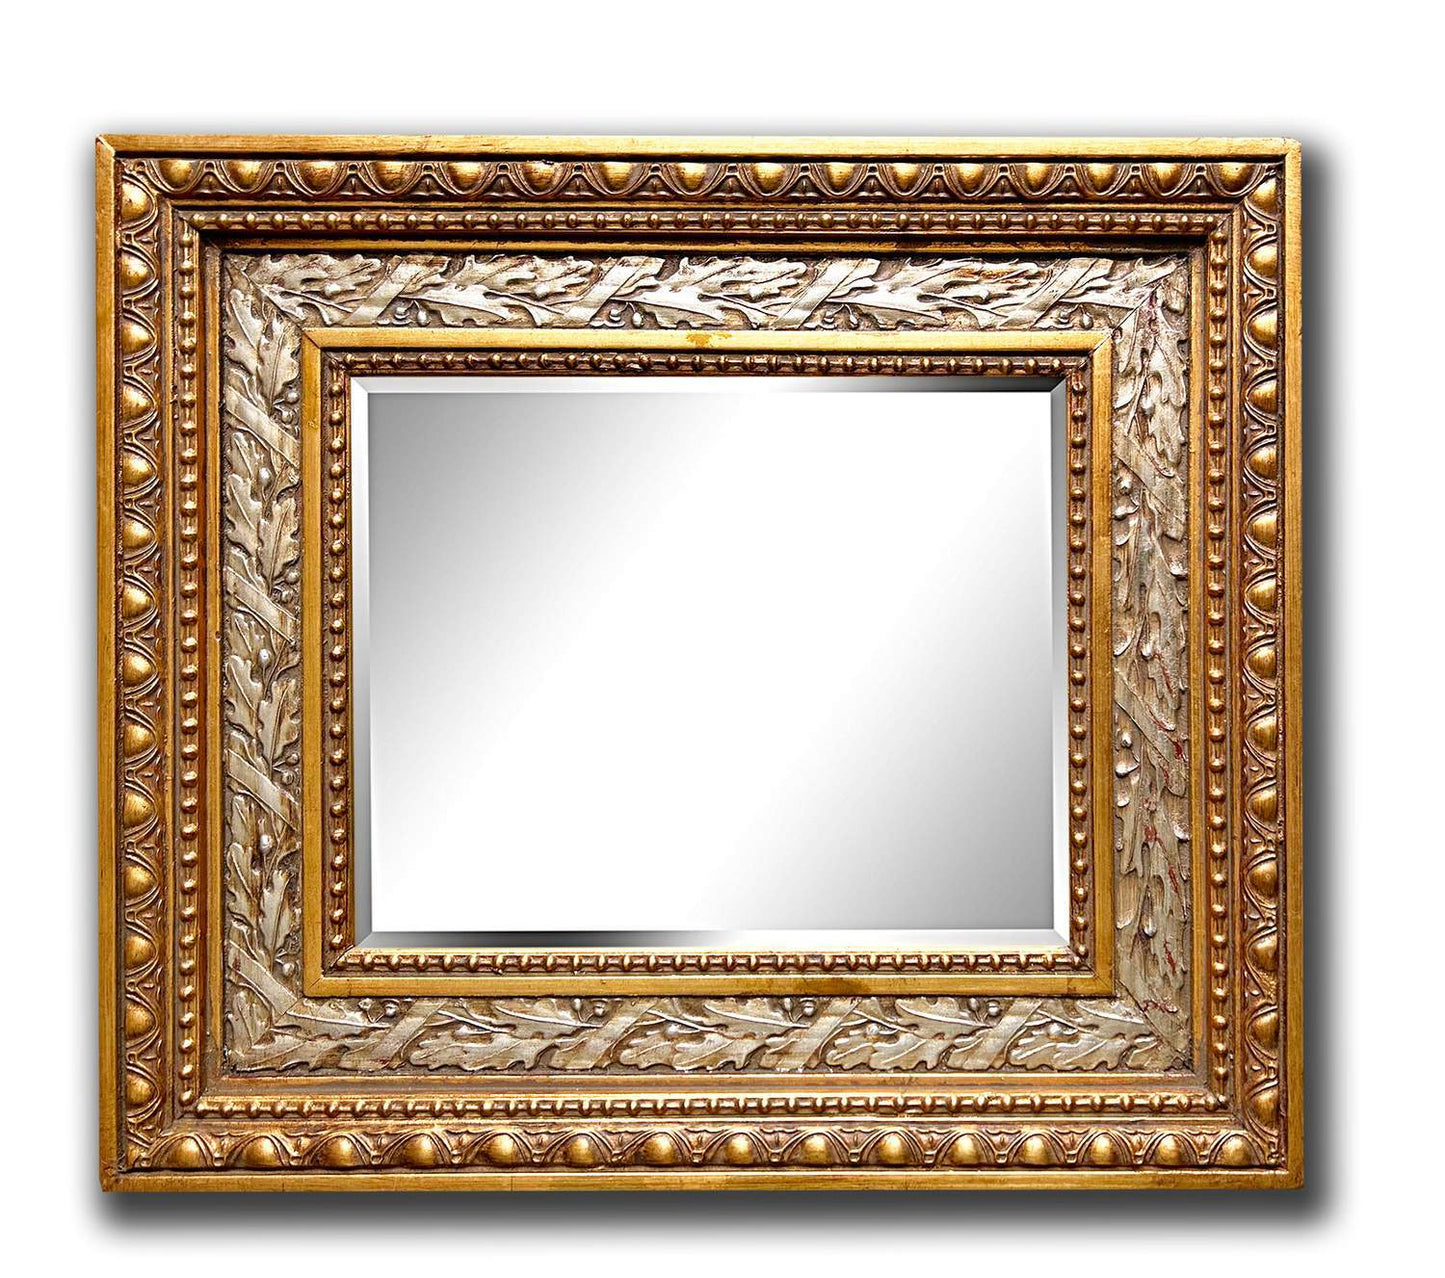 Mirror 20x25 cm or 8x10 ins, wooden photo frame